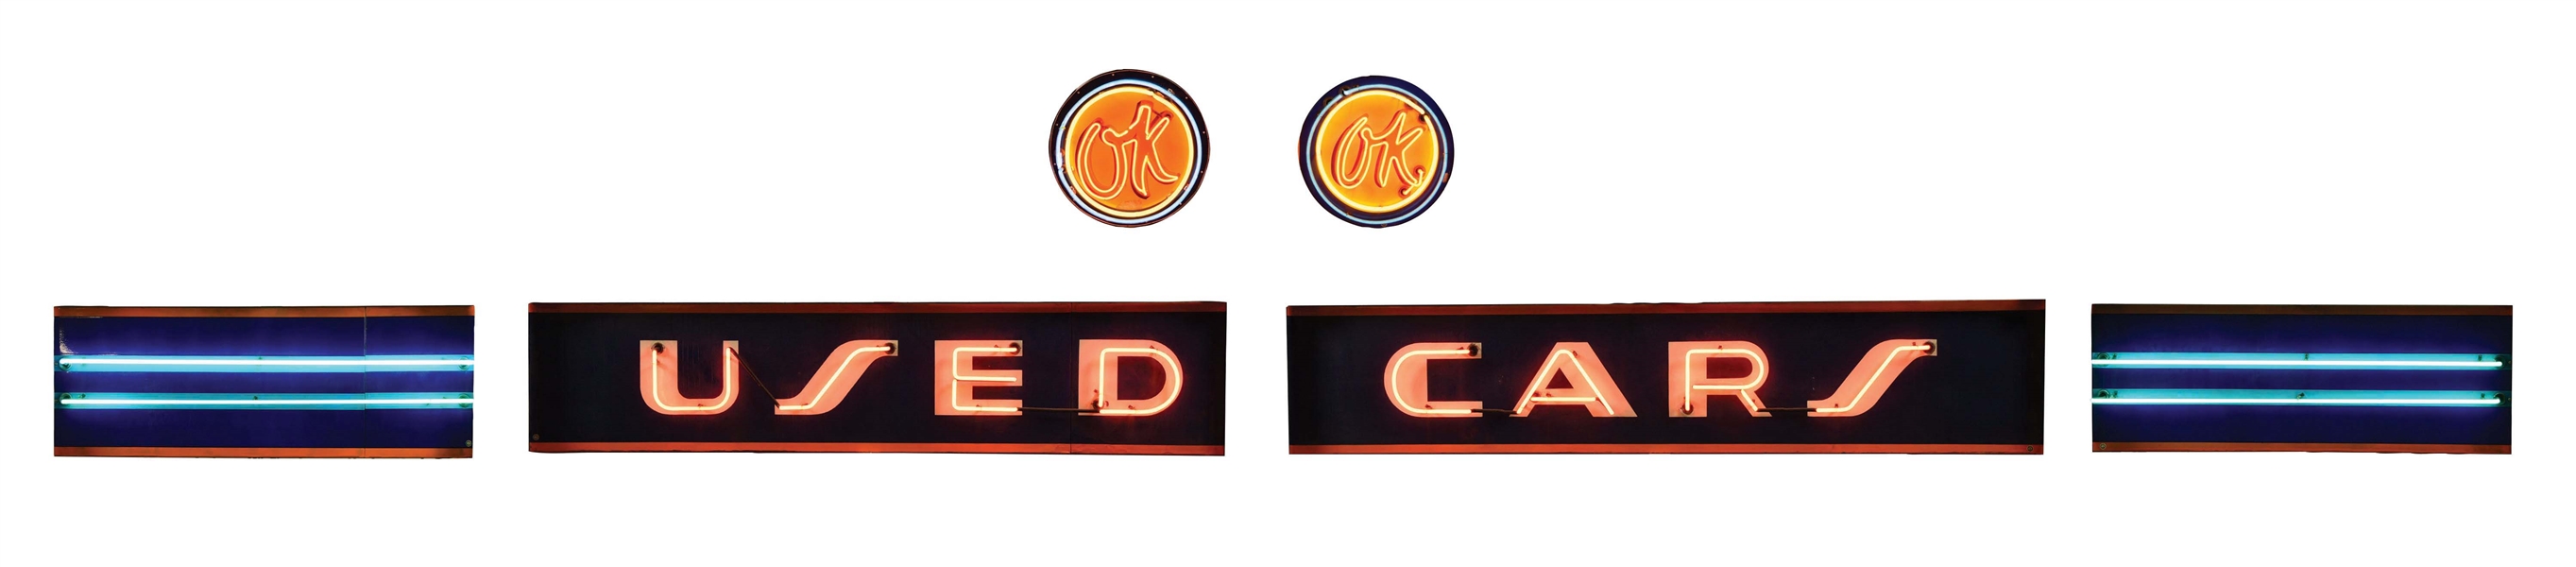 LARGE & OUTSTANDING SIX PIECE PORCELAIN OK USED CARS NEON STRIP SIGN W/ OK USED CAR NEON TOPPER SIGNS. 